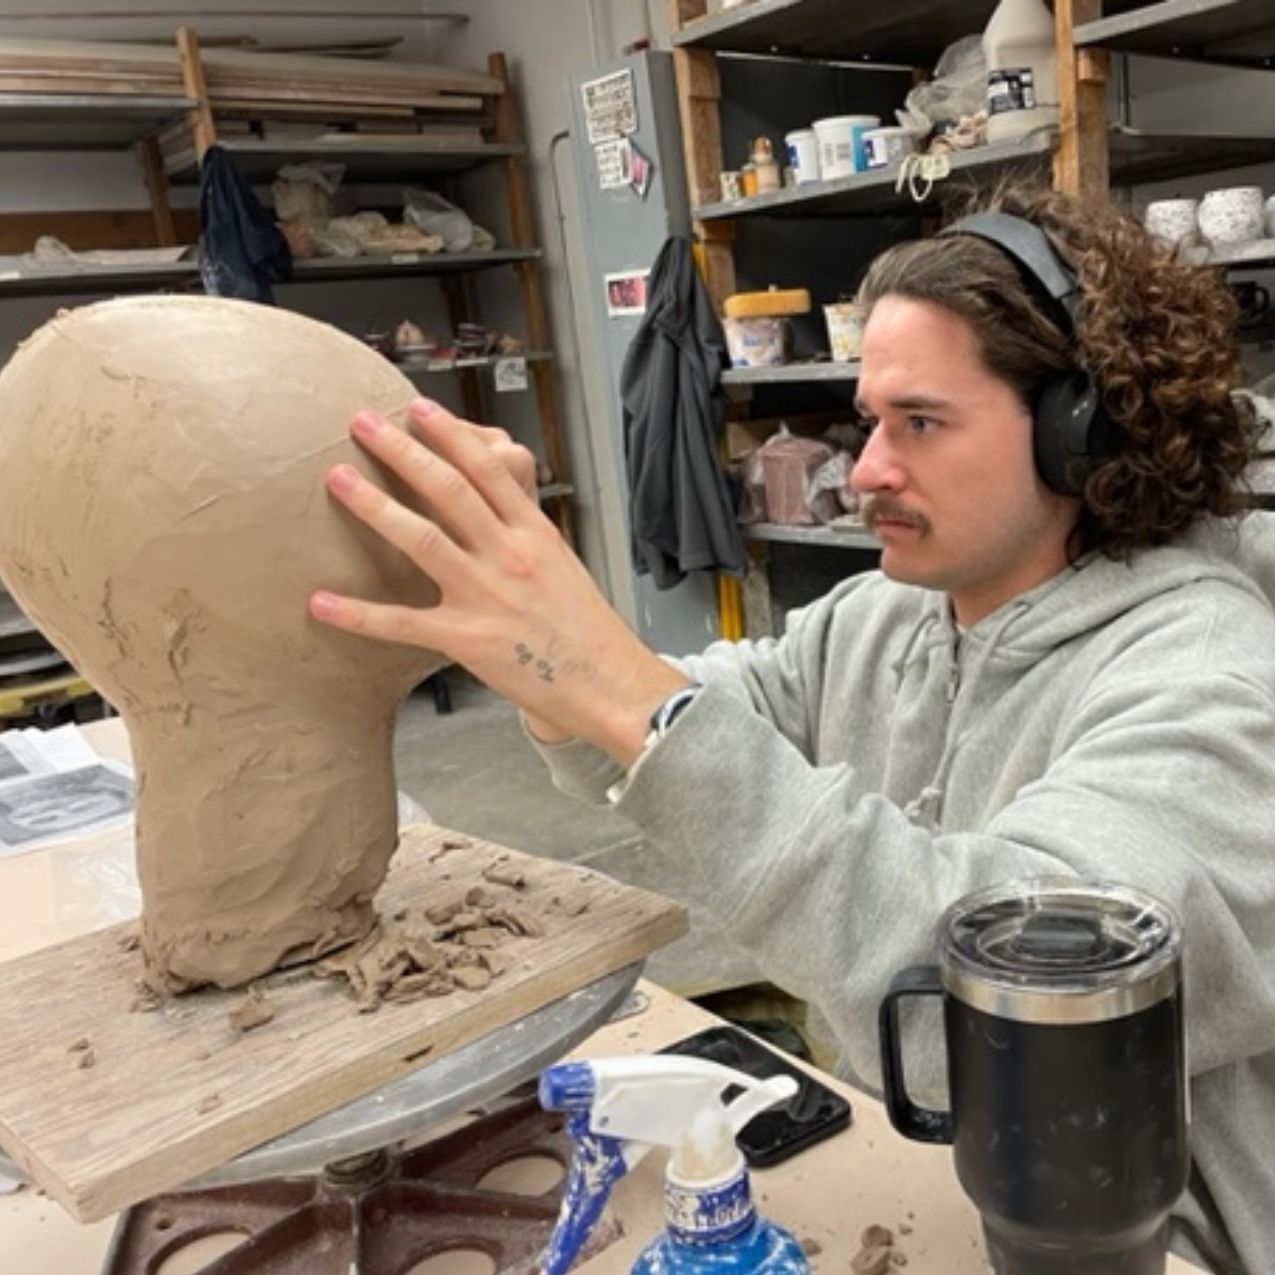 Art student at ISU works on carving a head/face out of clay in the ceramics studio